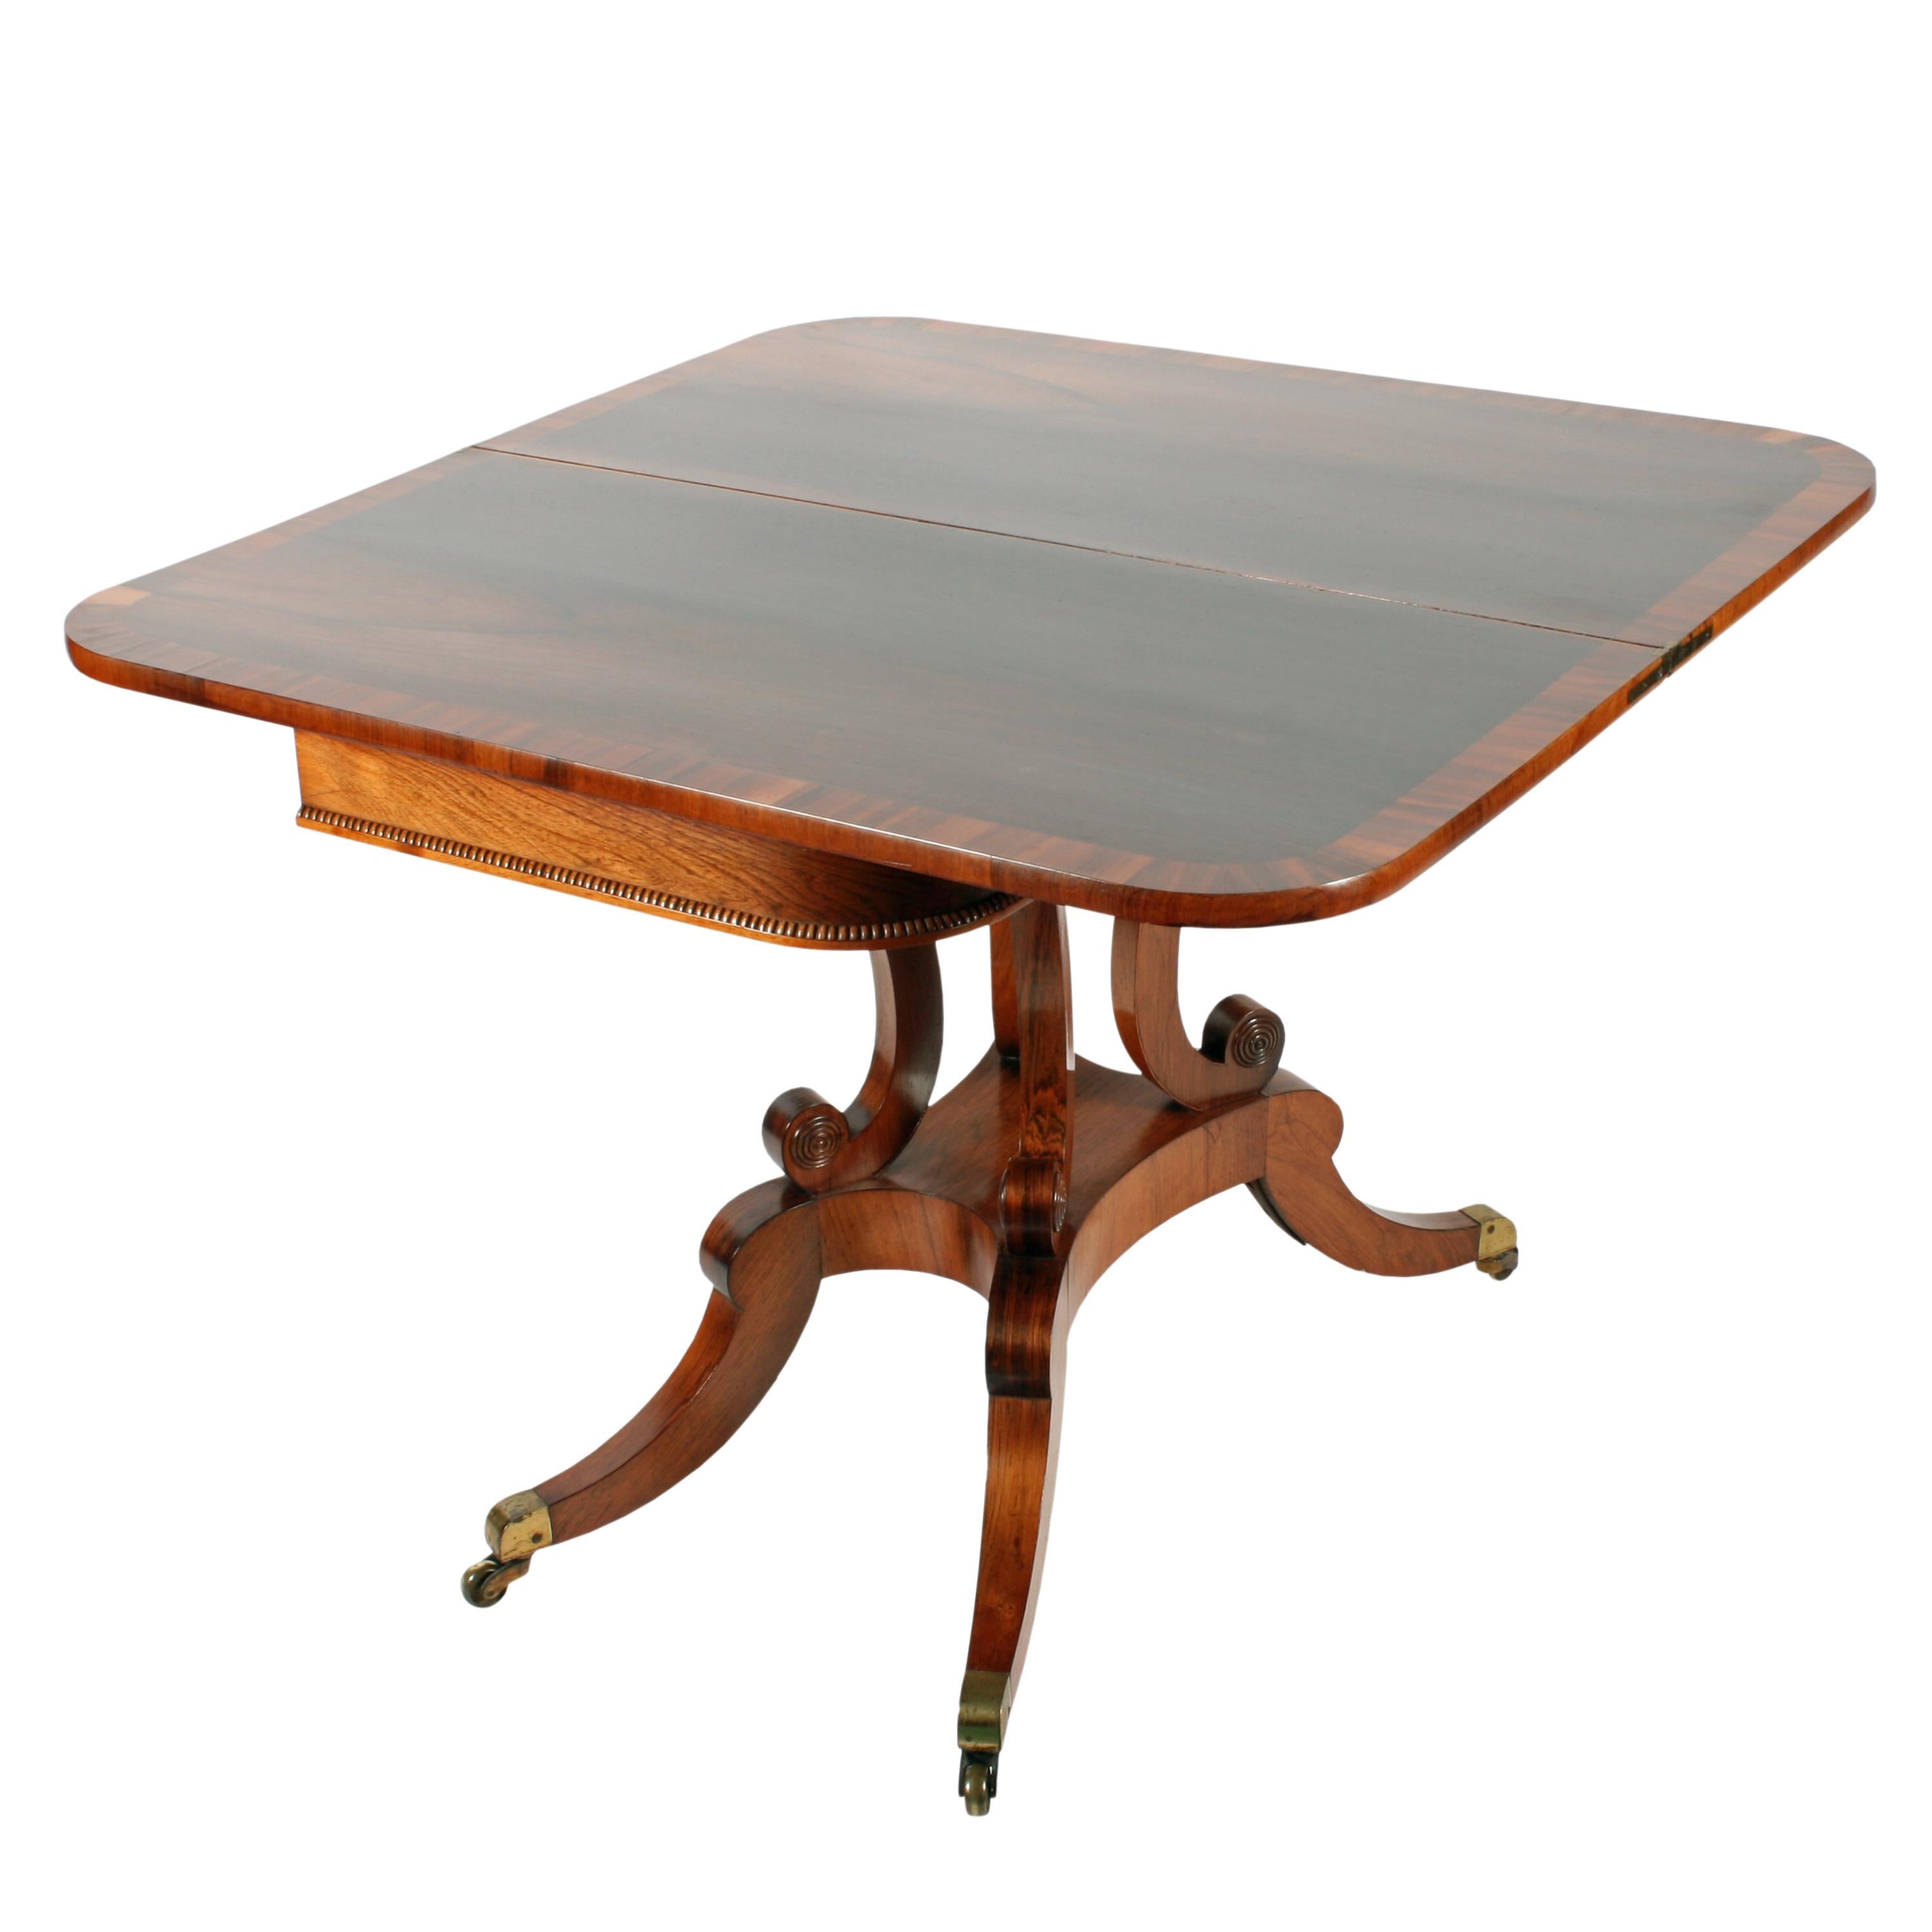 An early 19th century Scottish Regency rosewood turn over top tea table.

The table is in the style of Trotter of Edinburgh, the top and interior have a broad rosewood cross banded edge and a 'Pea' bead along the lower edge of the frieze.

The